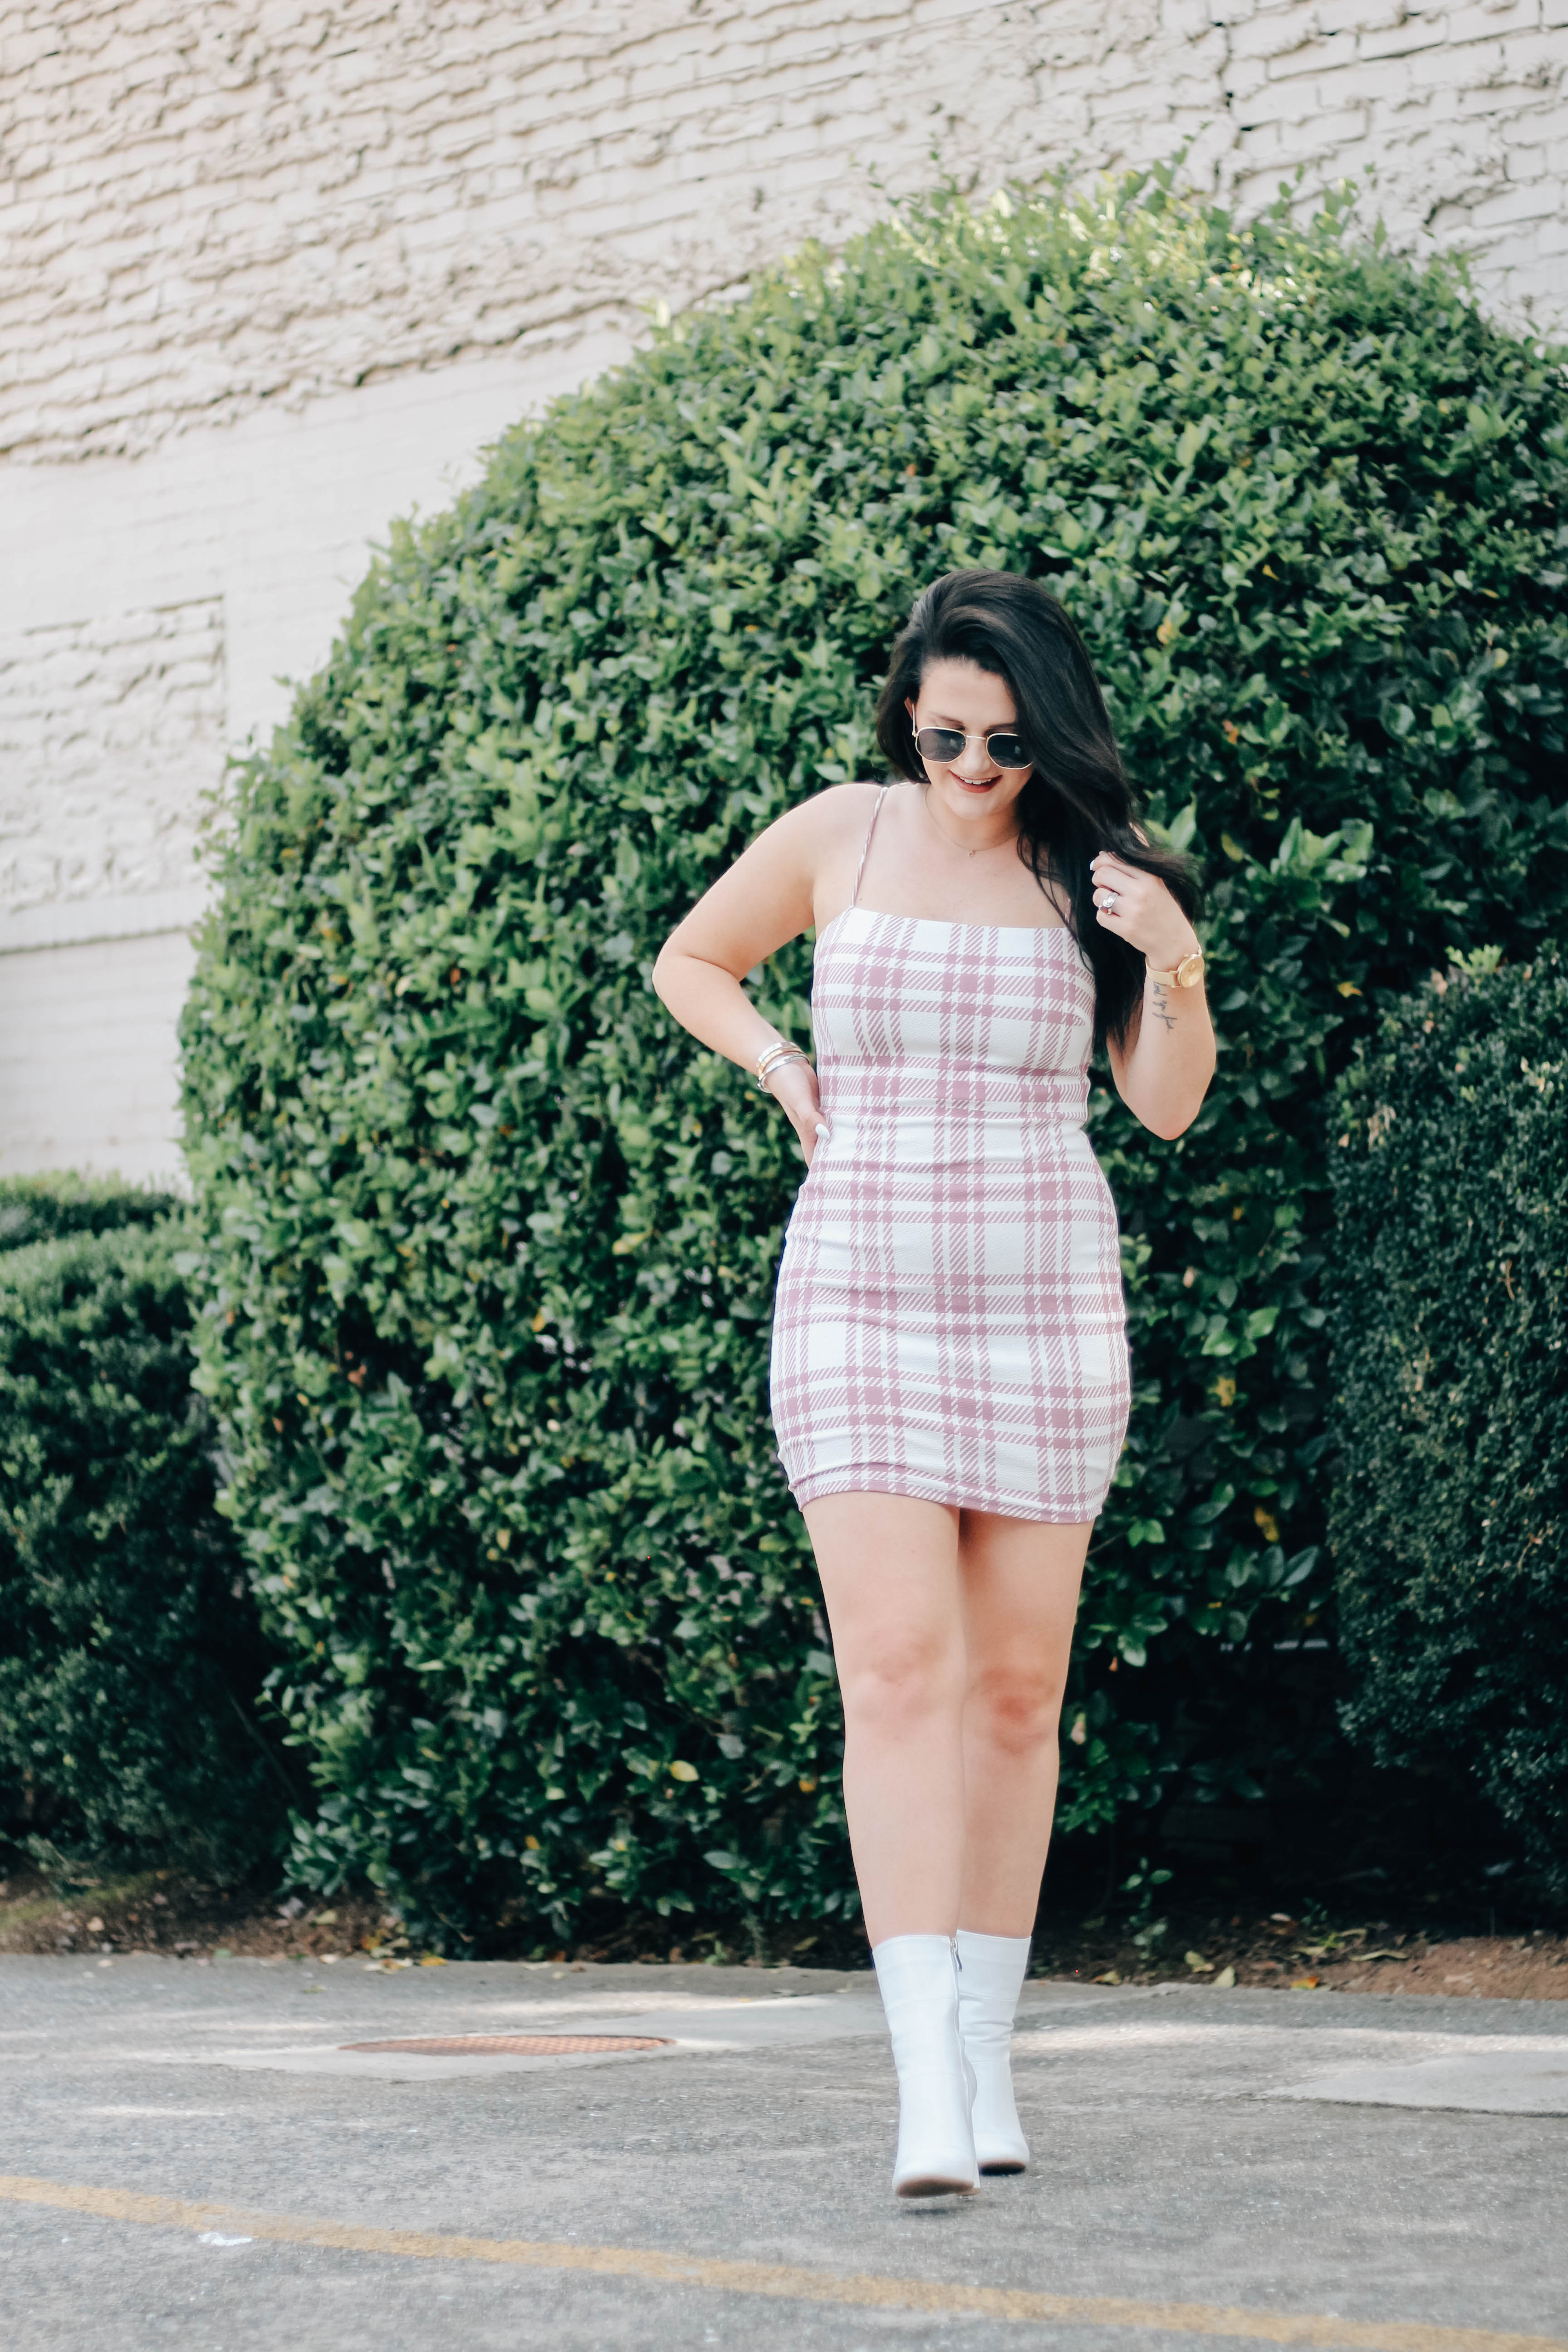 The Best Bodycon Dresses for Gals with Curves • Beautiful on a Budget